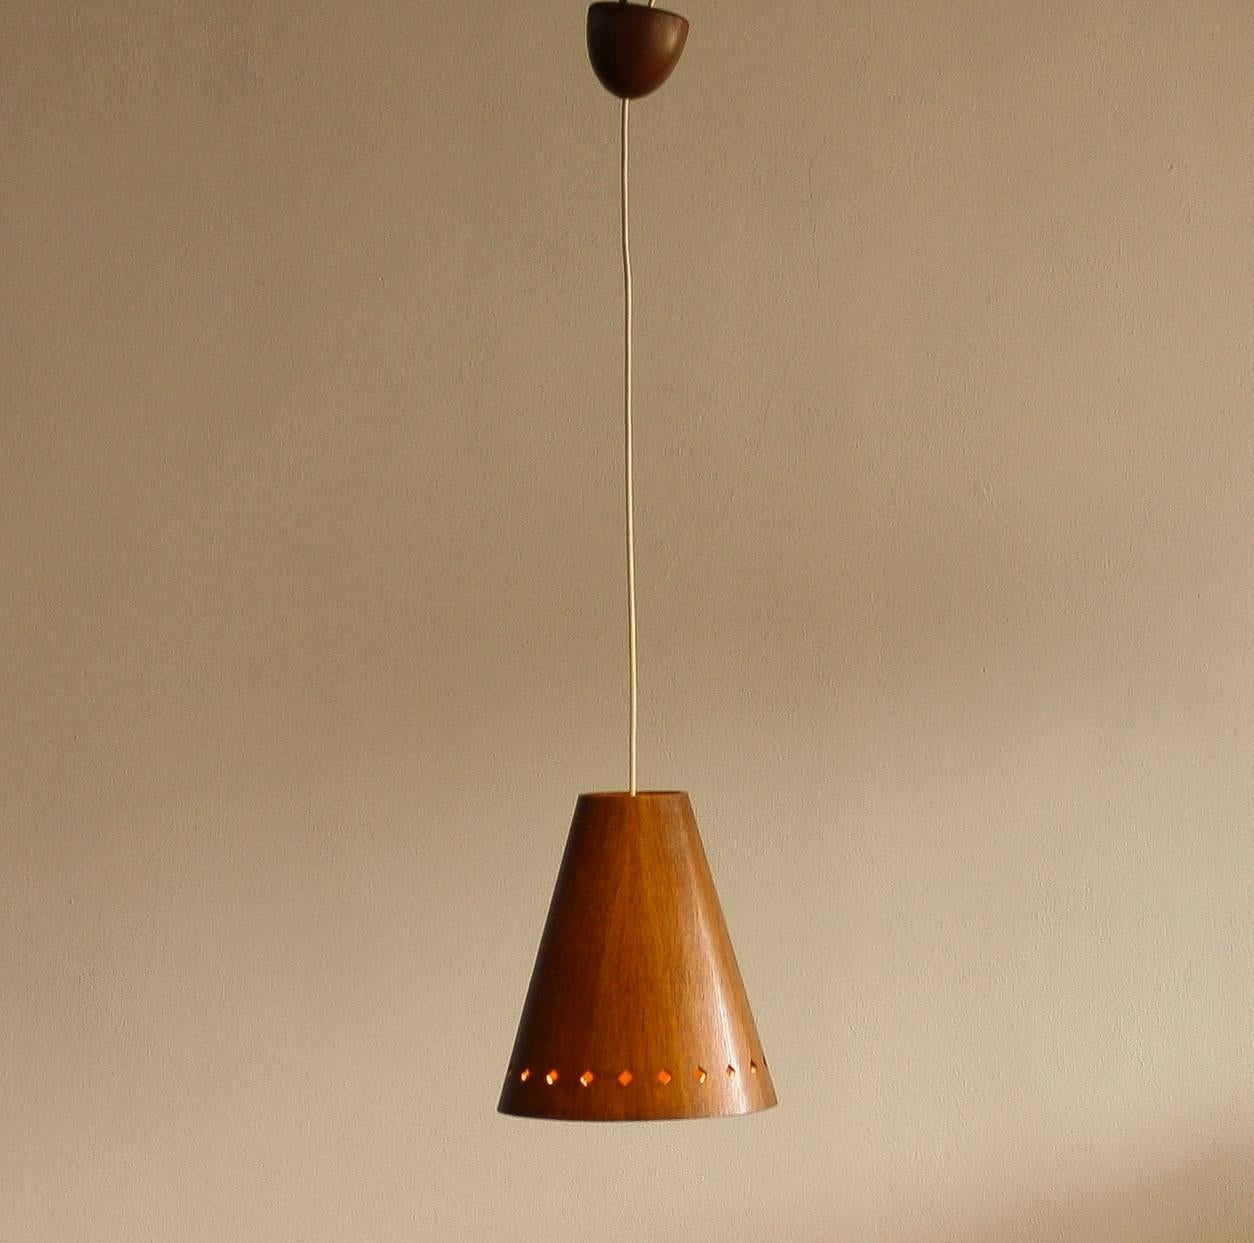 Very nice hanging lamp, model 565, made of wood designed by Uno & Östen Kristiansson for Luxus Vittsjö, Sweden.
The perforation on the shade gives it a beautiful shining.
The lamp is in very good condition.
Period 1950 
Dimension: H 30 cm, Ø 25